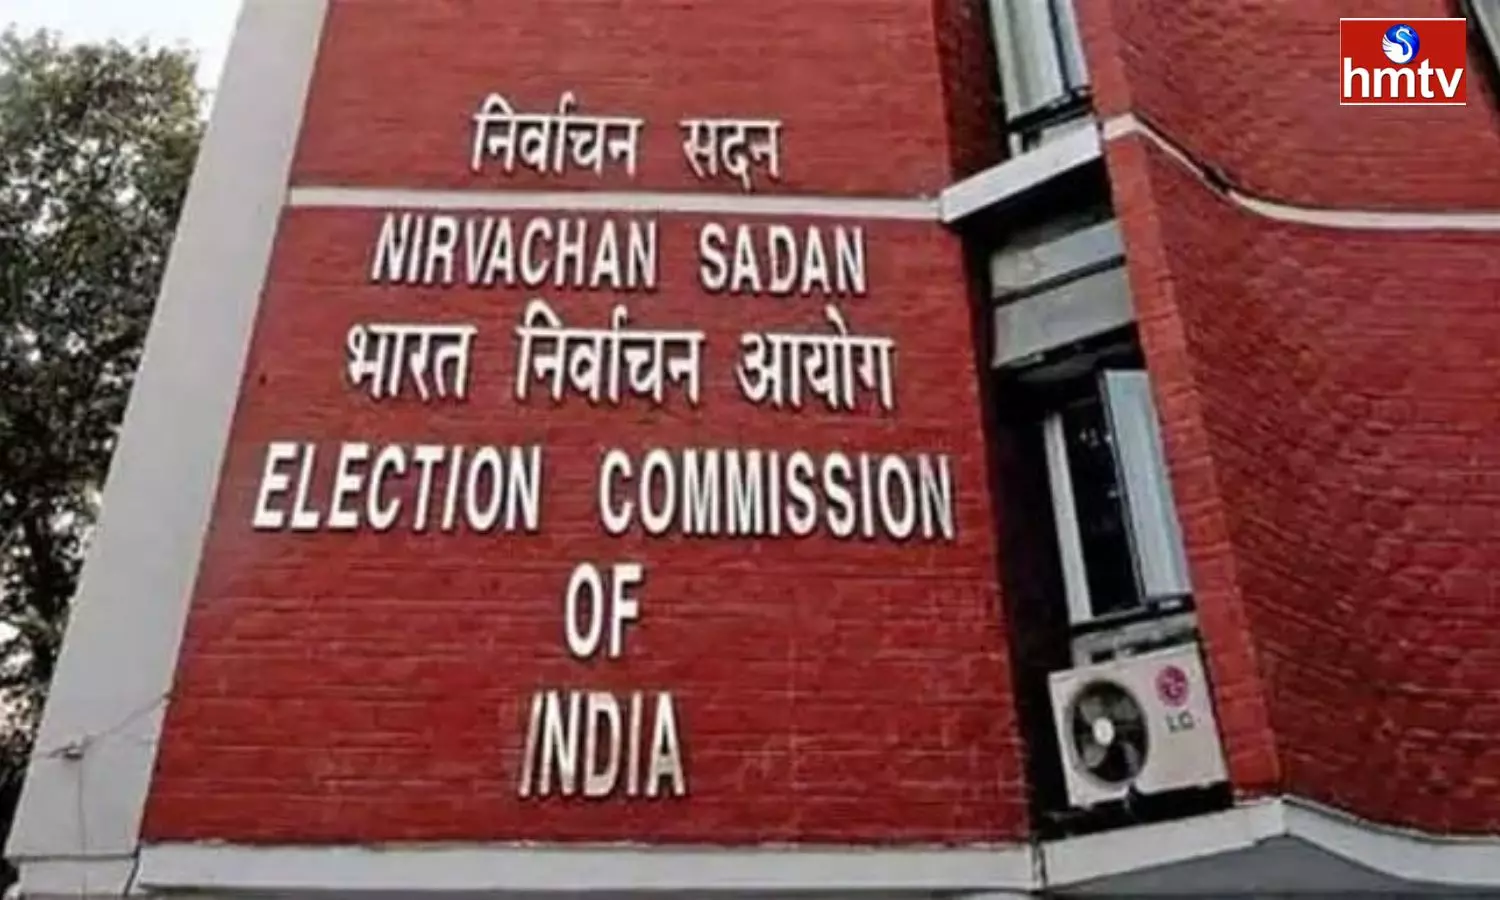 EC Expressed Anger Over Viksit Bharat Messages On WhatsApp